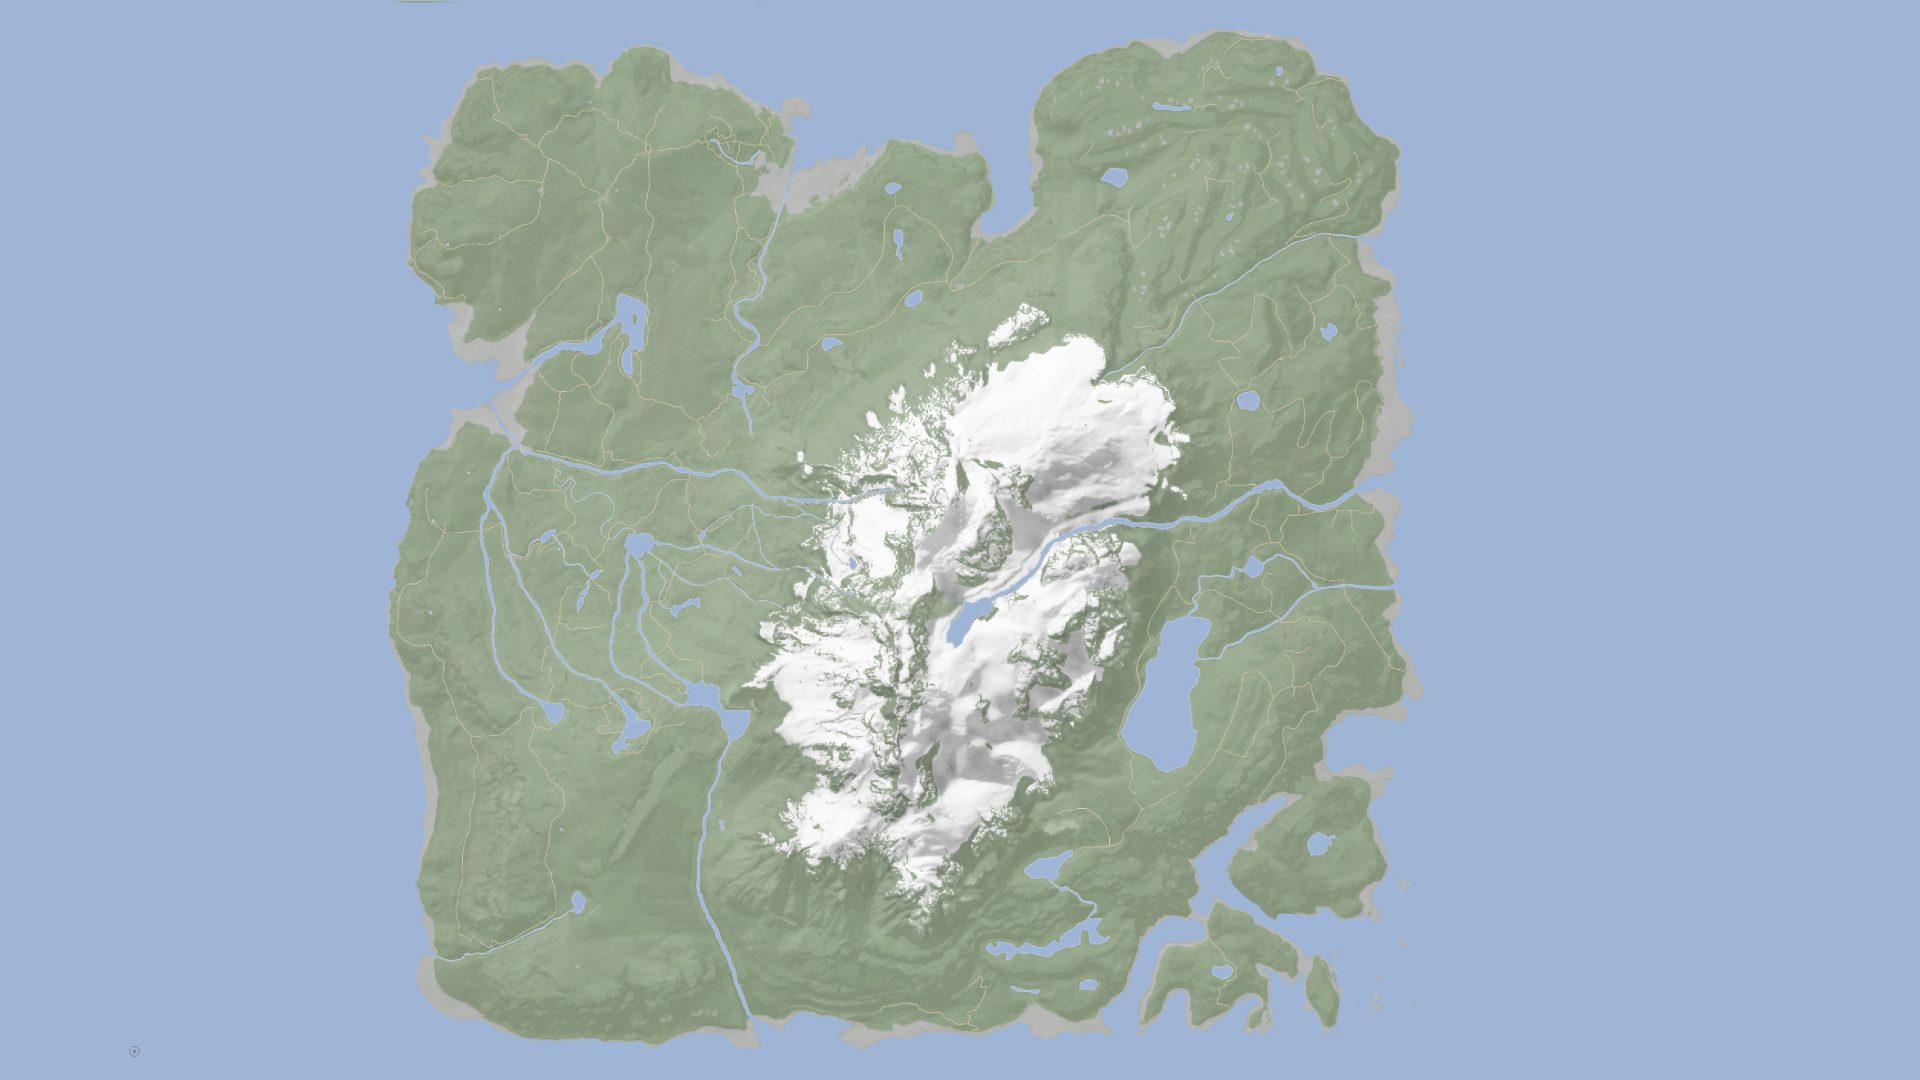 Sons of the Forest Map Image: A map image of the Sons of the Forest map can be seen